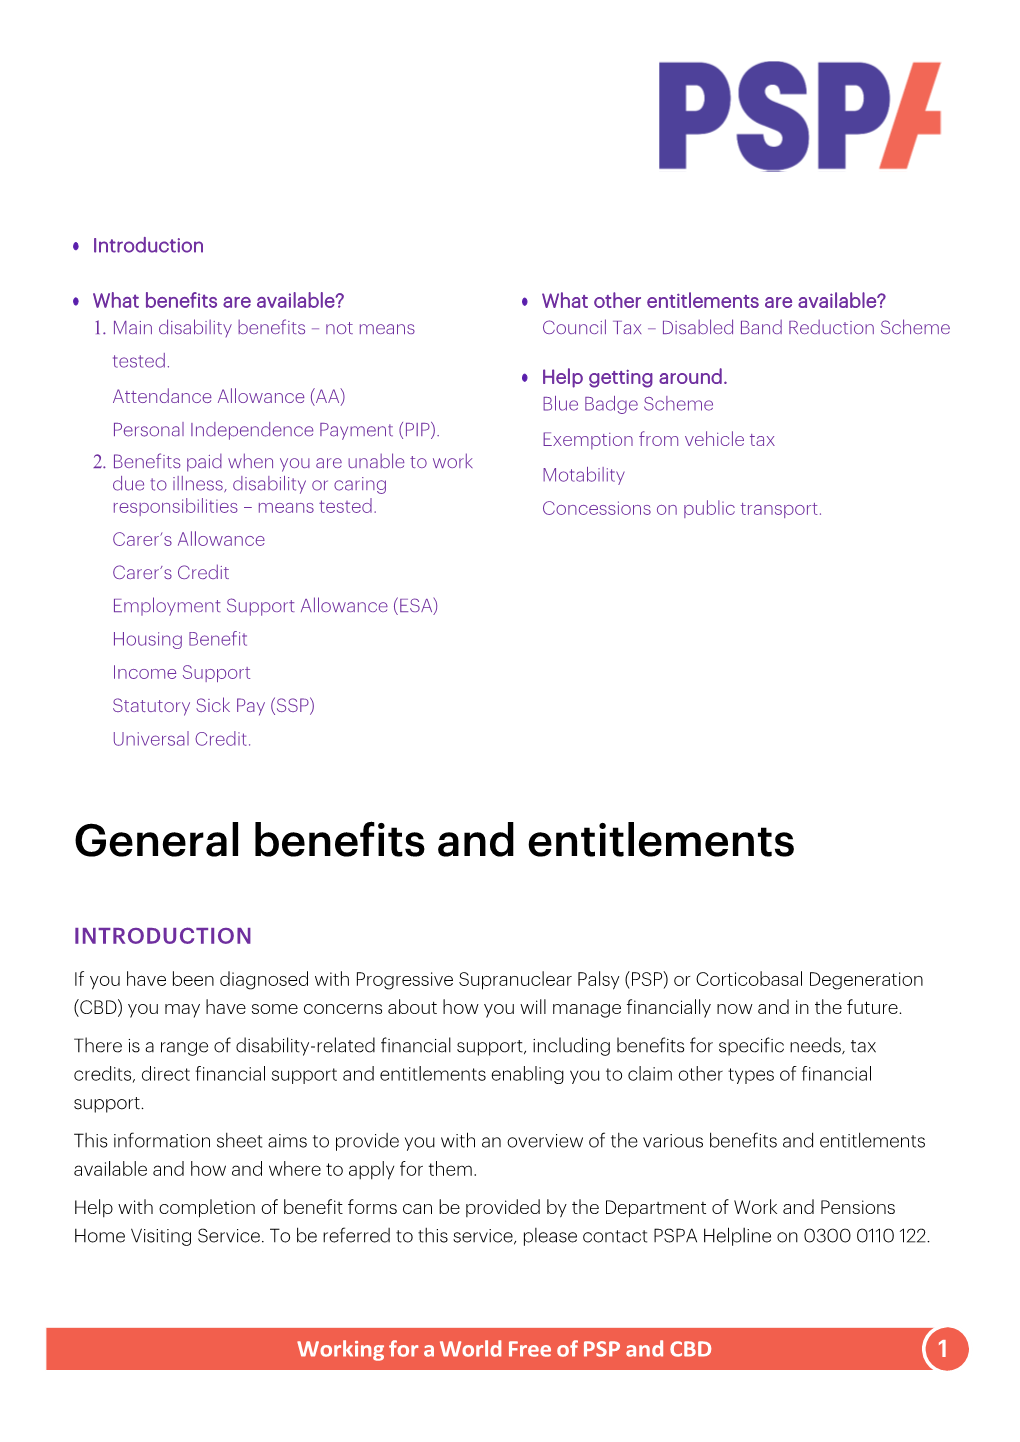 General Benefits and Entitlements